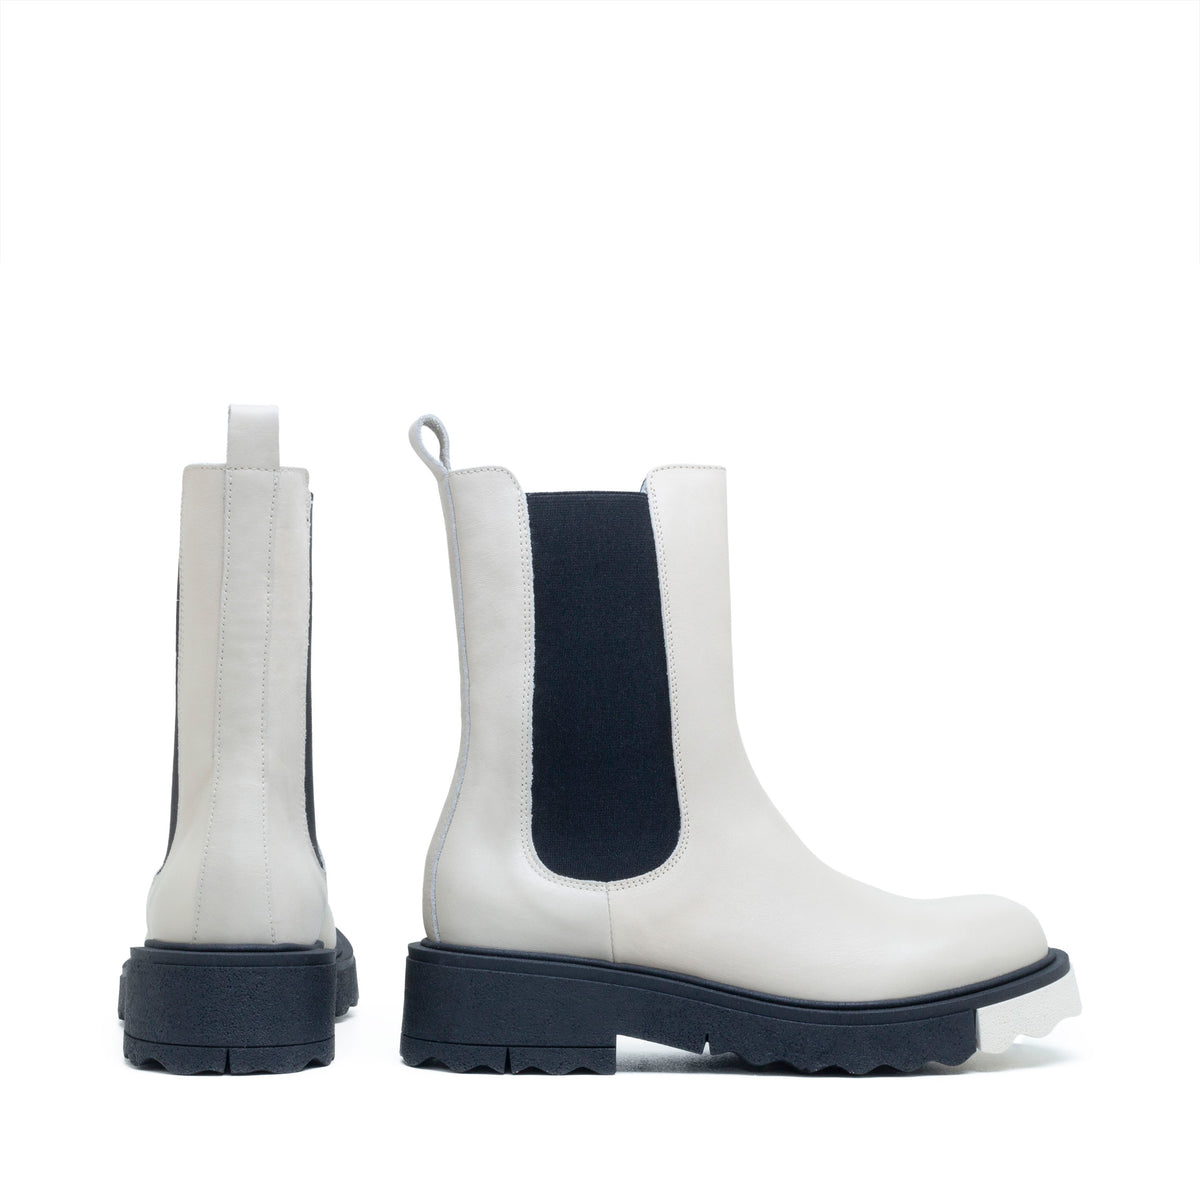 LONDON CHELSEA BOOT SPECIAL EDITION